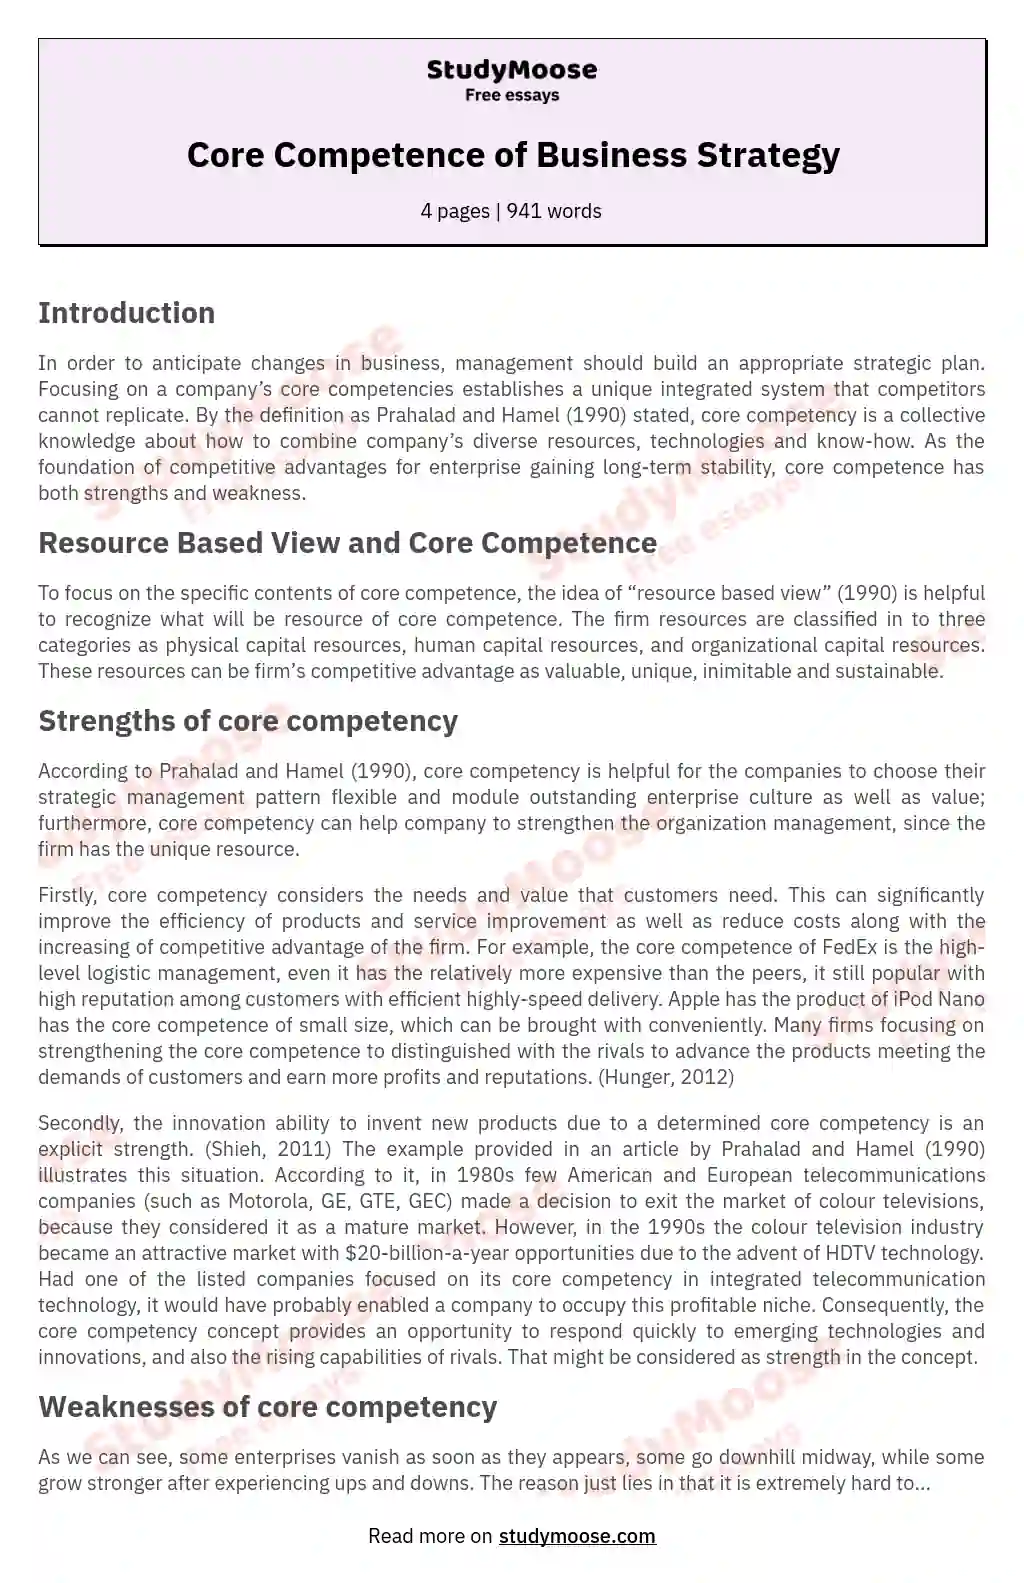 Core Competence of Business Strategy essay